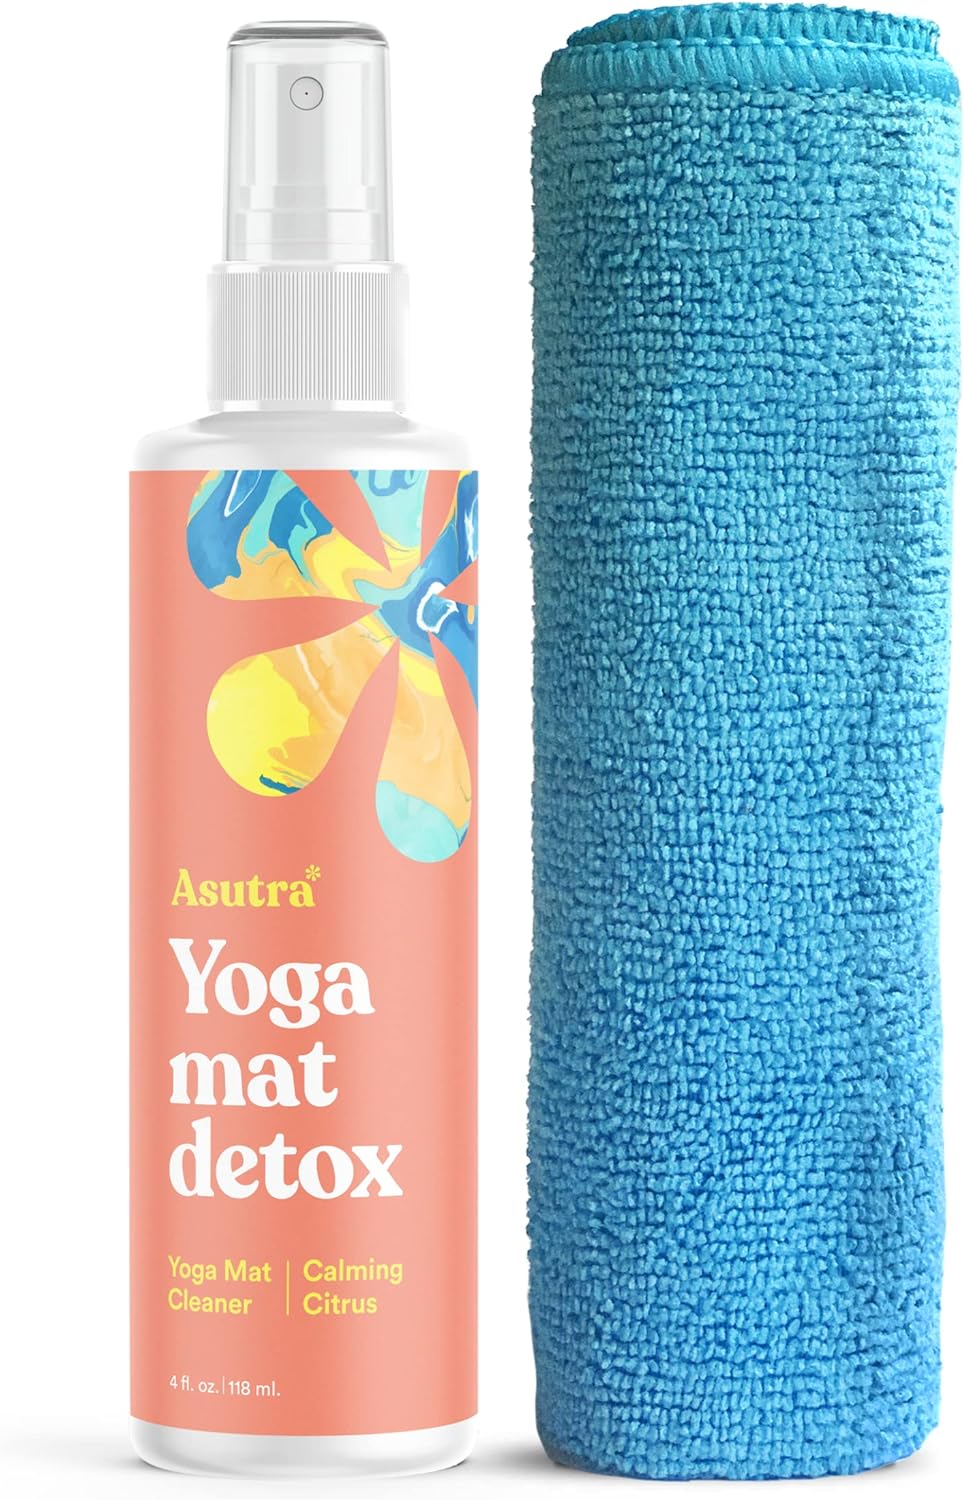 ASUTRA Yoga Mat Cleaner Spray (Calming Citrus), 4 fl oz - No Slippery Residue, Organic Essential Oils, Deep-Cleansing for Fitness Gear & Gym Equipment, Microfiber Towel Included